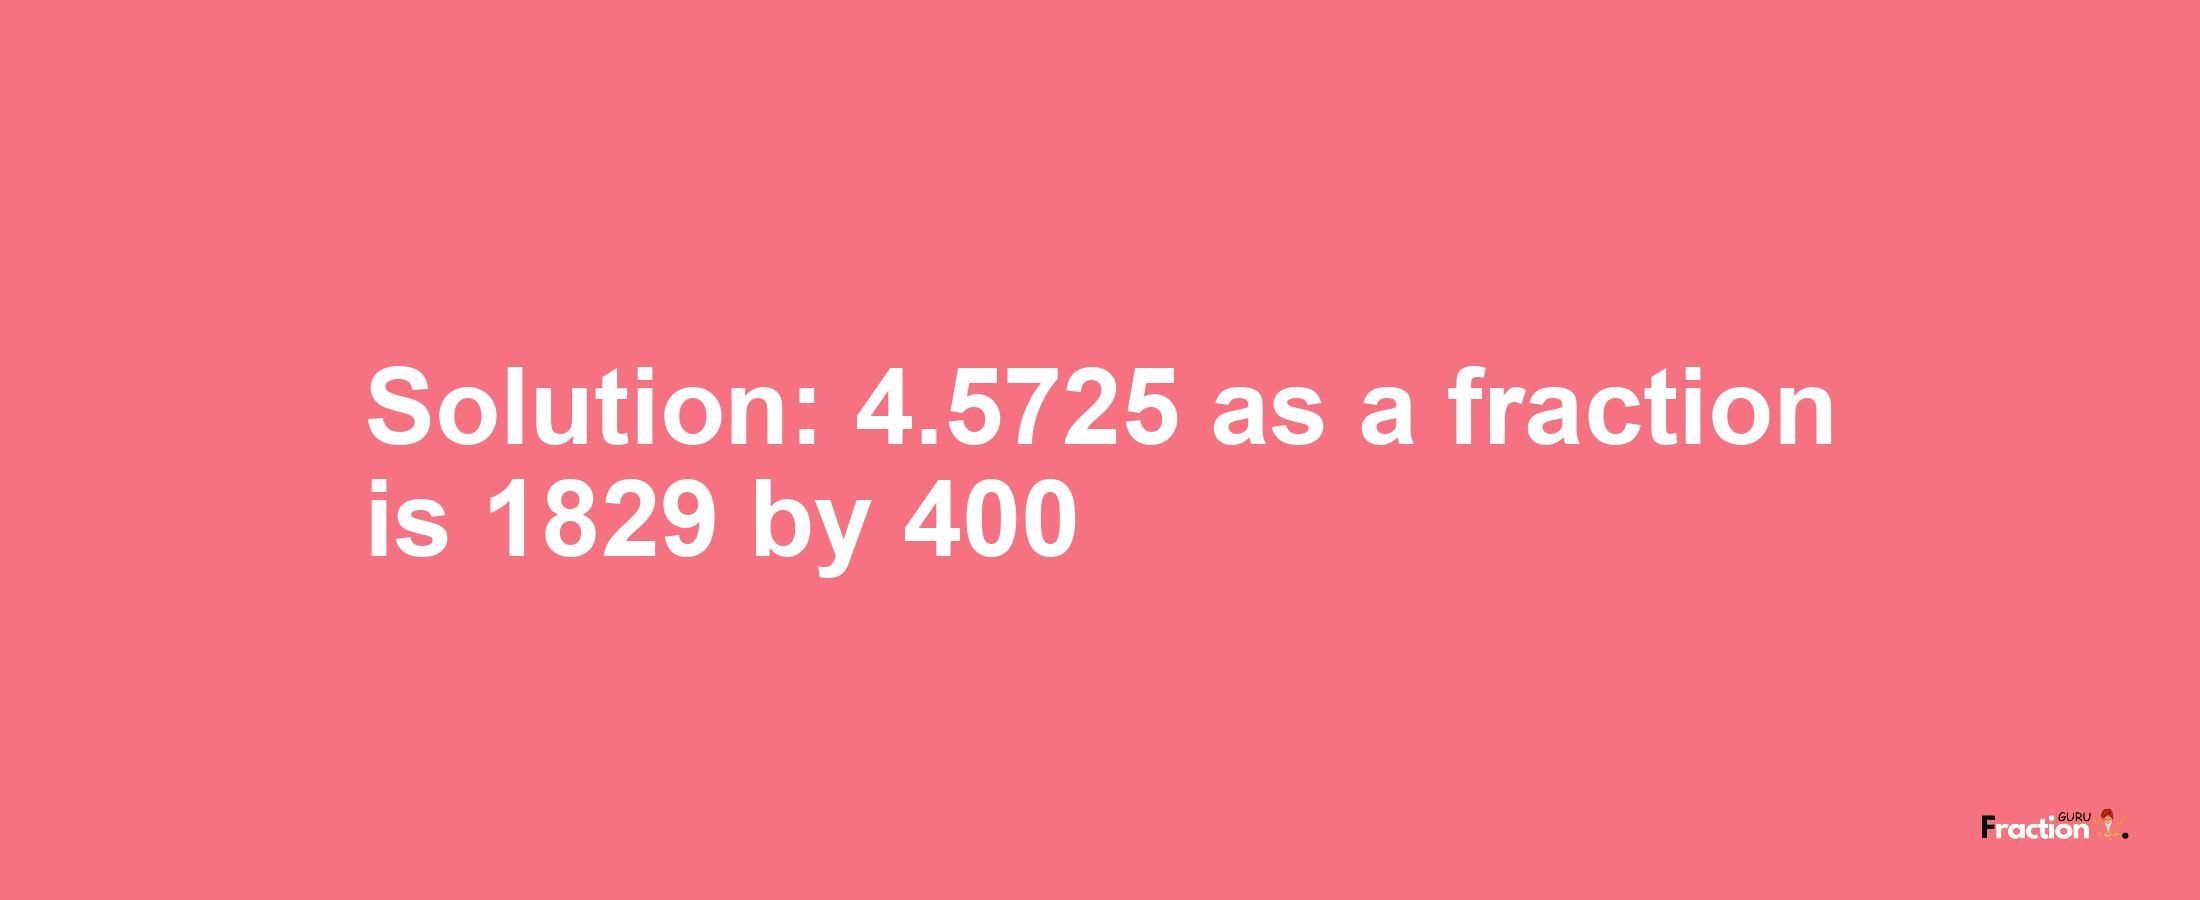 Solution:4.5725 as a fraction is 1829/400